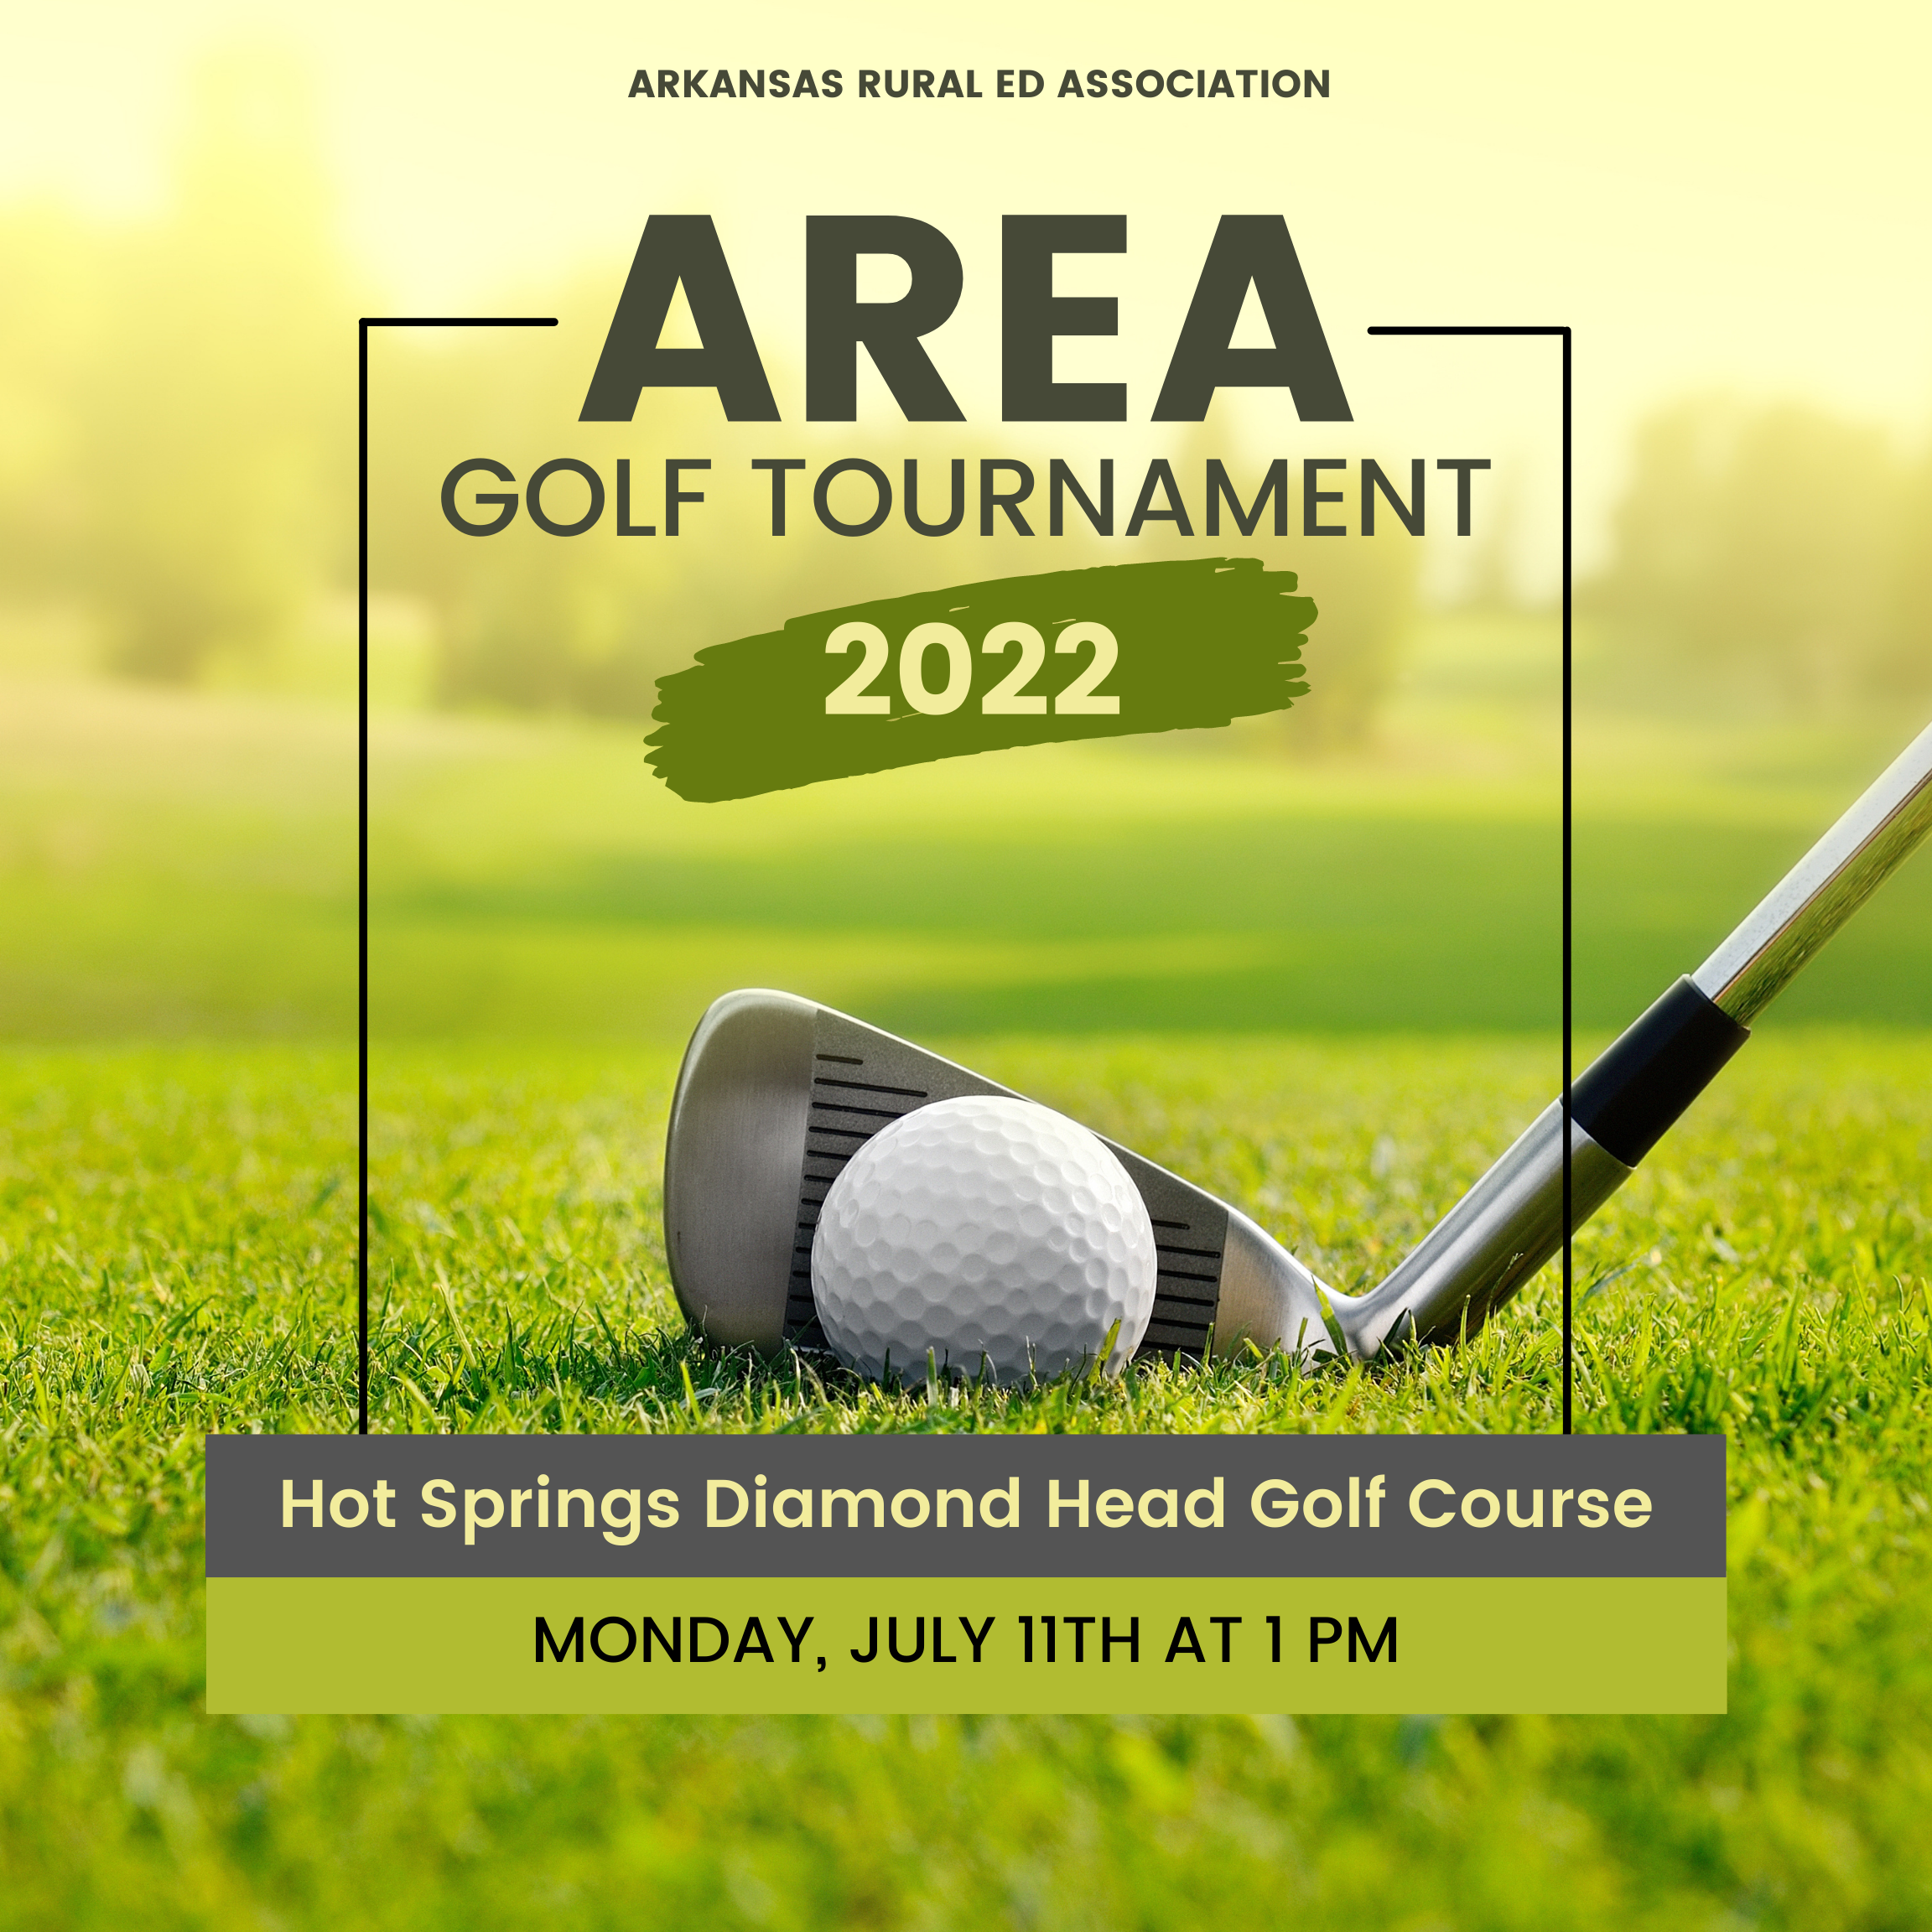 The AREA Golf Tournament will be on Monday, July 11th starting at approximately 1:00 pm at the Hot Springs Diamond Head Golf Course. If interested in participating in the tournament please contact George Foshee at: kforshee@cablelynx.com or text 501-622-7431.